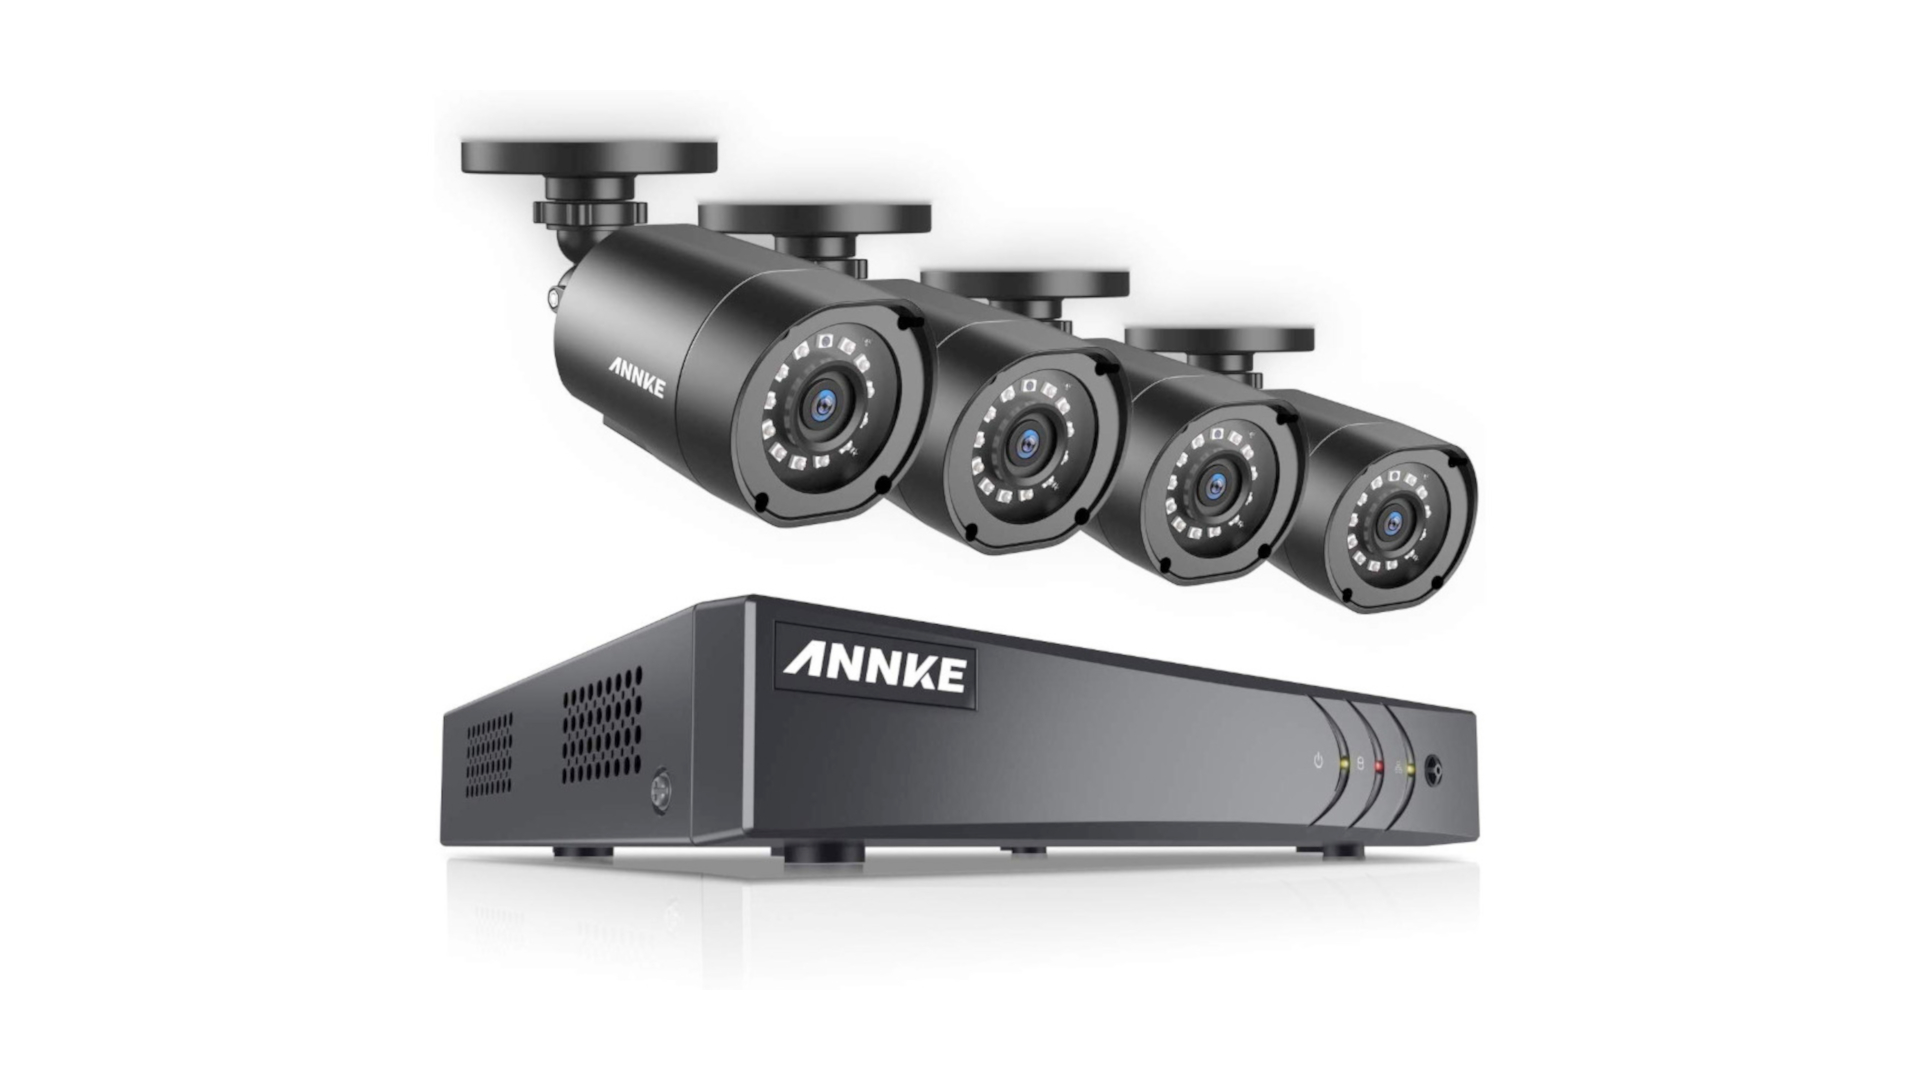 ANNKE 8 Channels 1080P Lite DVR Video Security Digital Recorder 8CH Digital Video Recorder with 1TB Hard Drive for Home CCTV Camera System 8CH Surveillance System Network Motion Detection H.264 